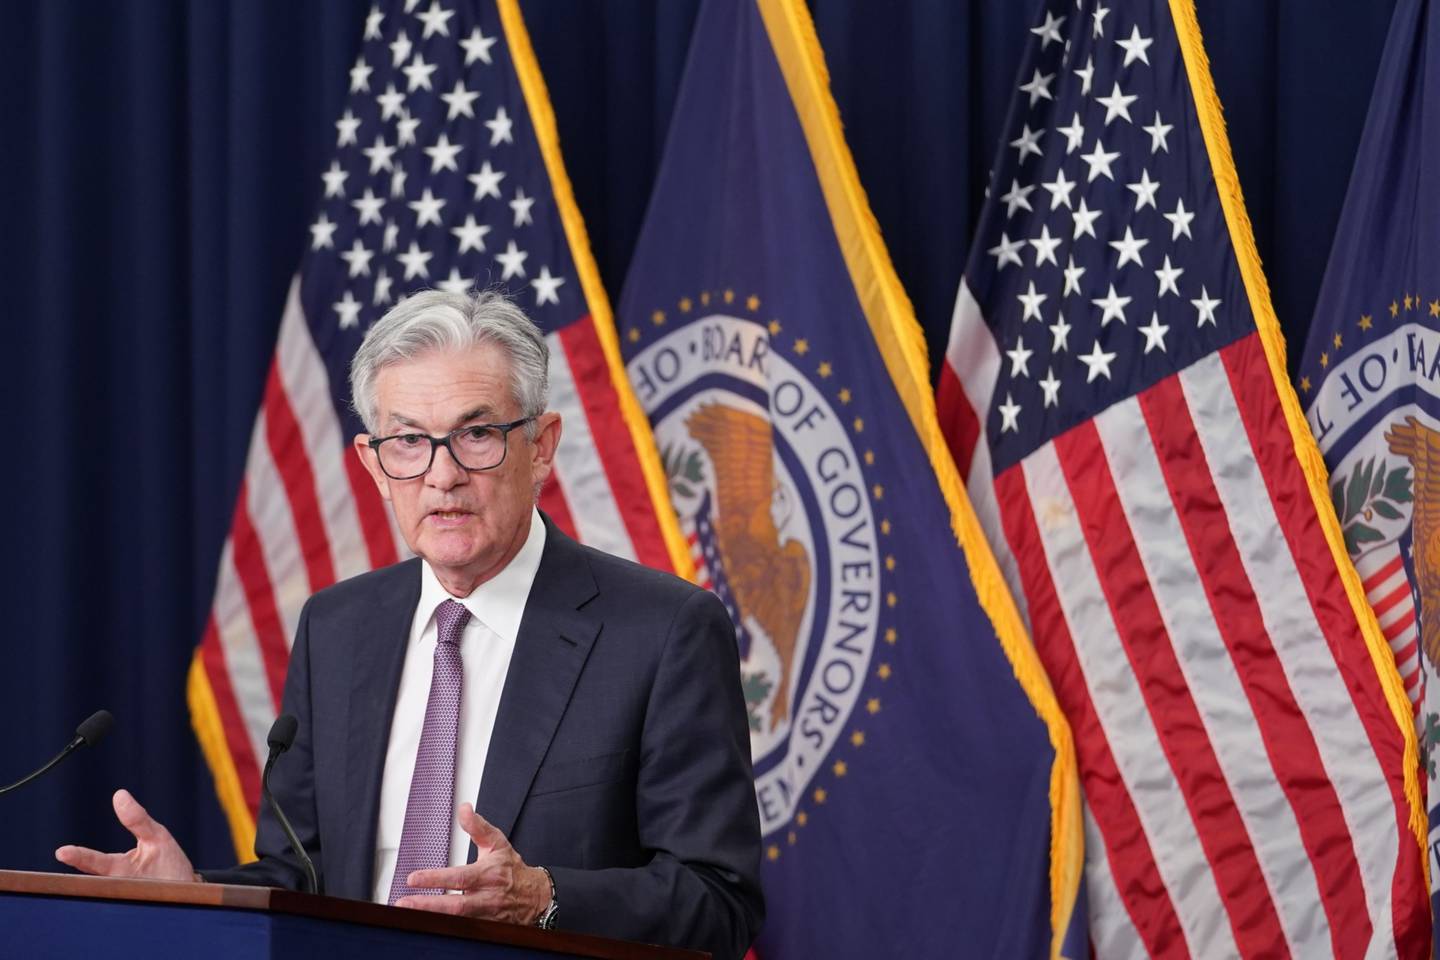 Jerome Powell, chairman of the US Federal Reserve, speaks during a news conference following a Federal Open Market Committee (FOMC) meeting in Washington, D.C., US, on Wednesday, Sept. 21, 2022. Federal Reserve officials raised interest rates by 75 basis points for the third consecutive time and forecast they would reach 4.6% in 2023. Photographer: Sarah Silbiger/Bloomberg 